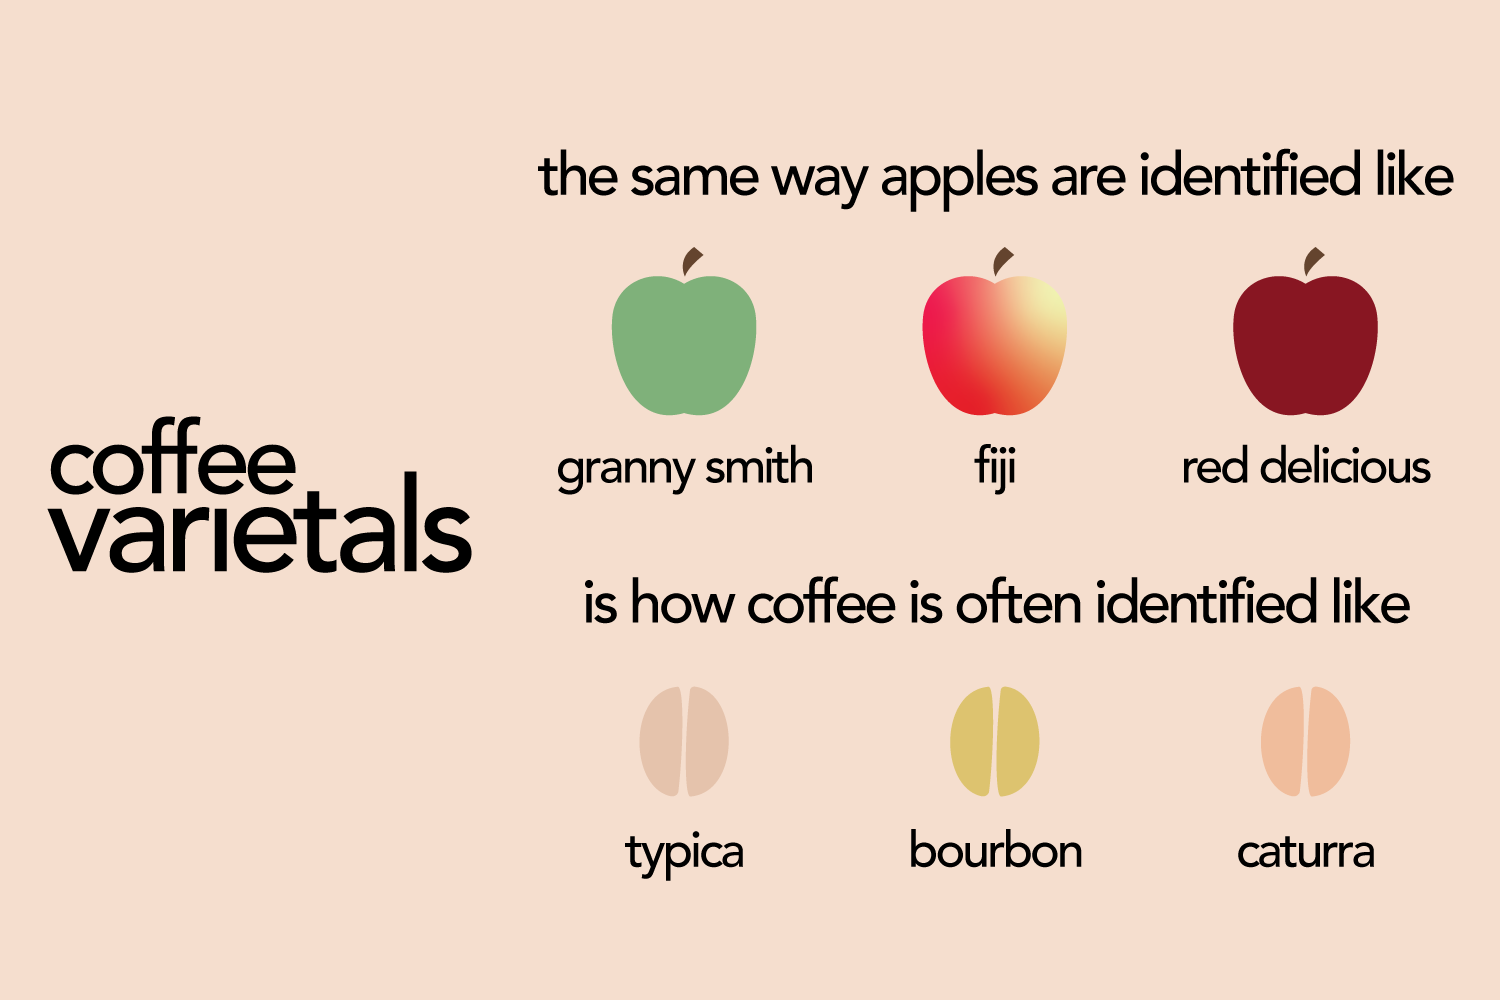 coffee varietals explained through the correlation of them and apple varieties